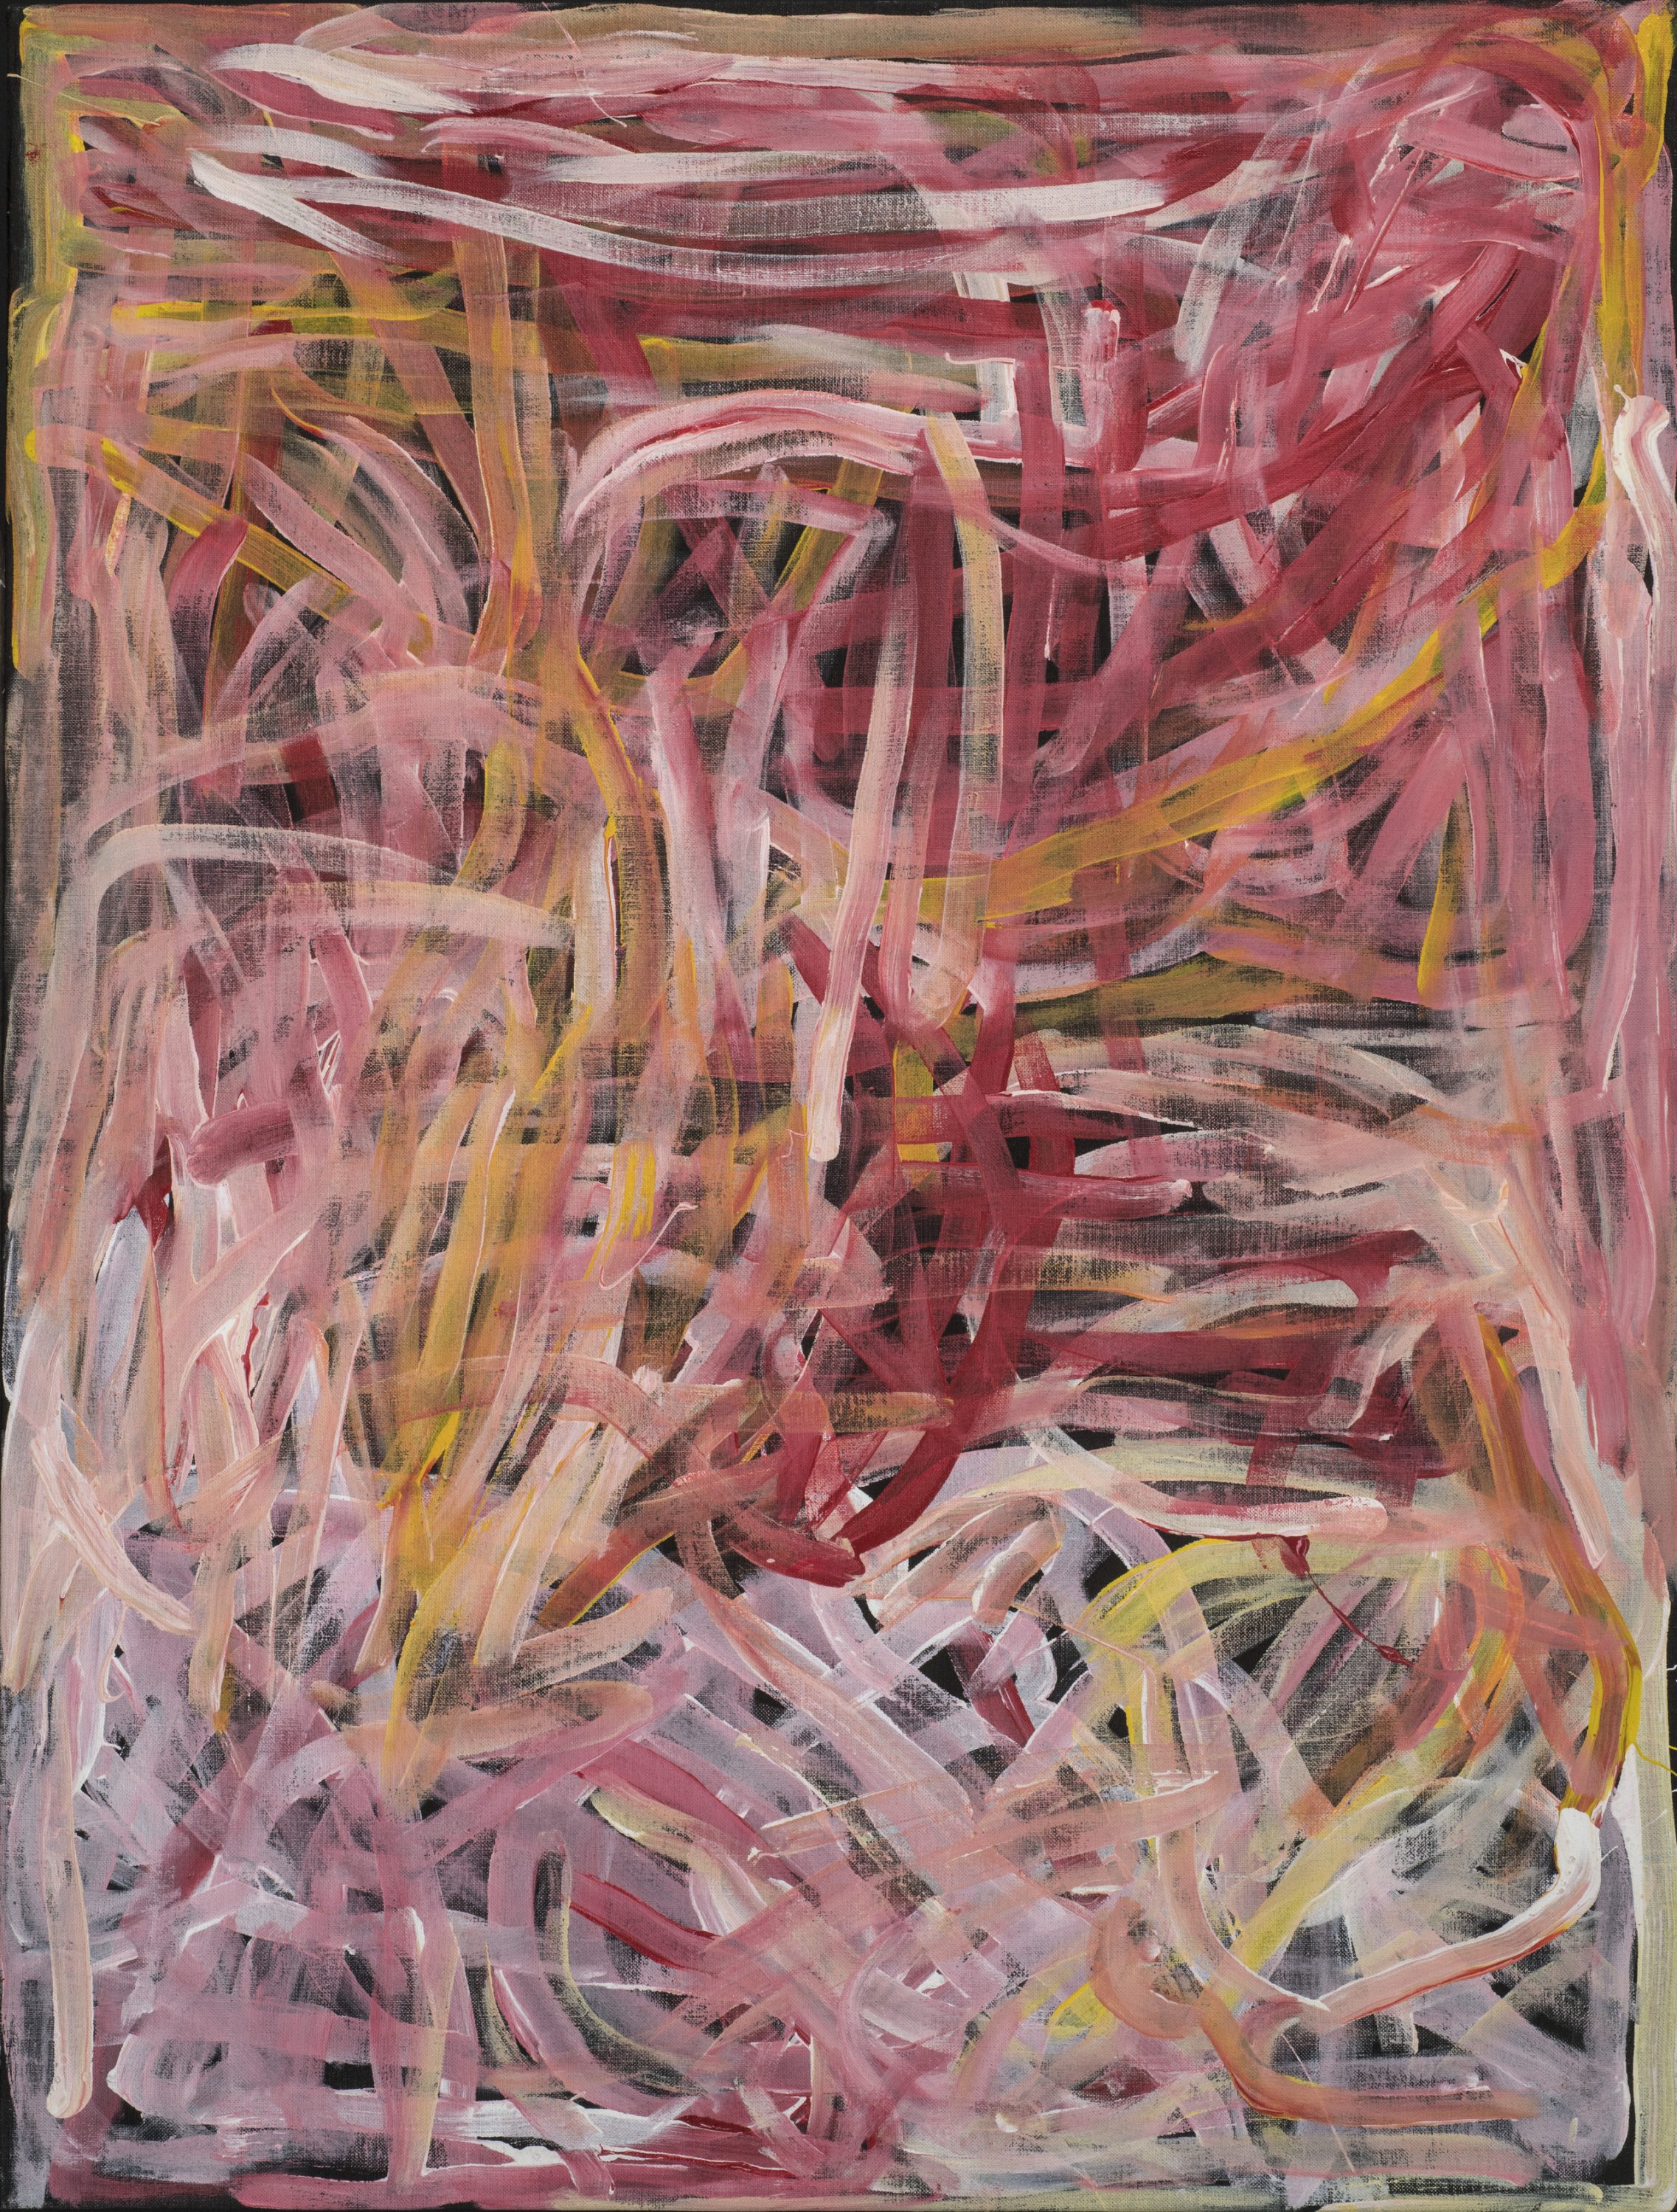 Abstract painting of long, layered brushstrokes in shades of red, pink, orange and white, laid over a black background. The brushstrokes intersect, weave together, and overlap, creating a frenzied web of lines.